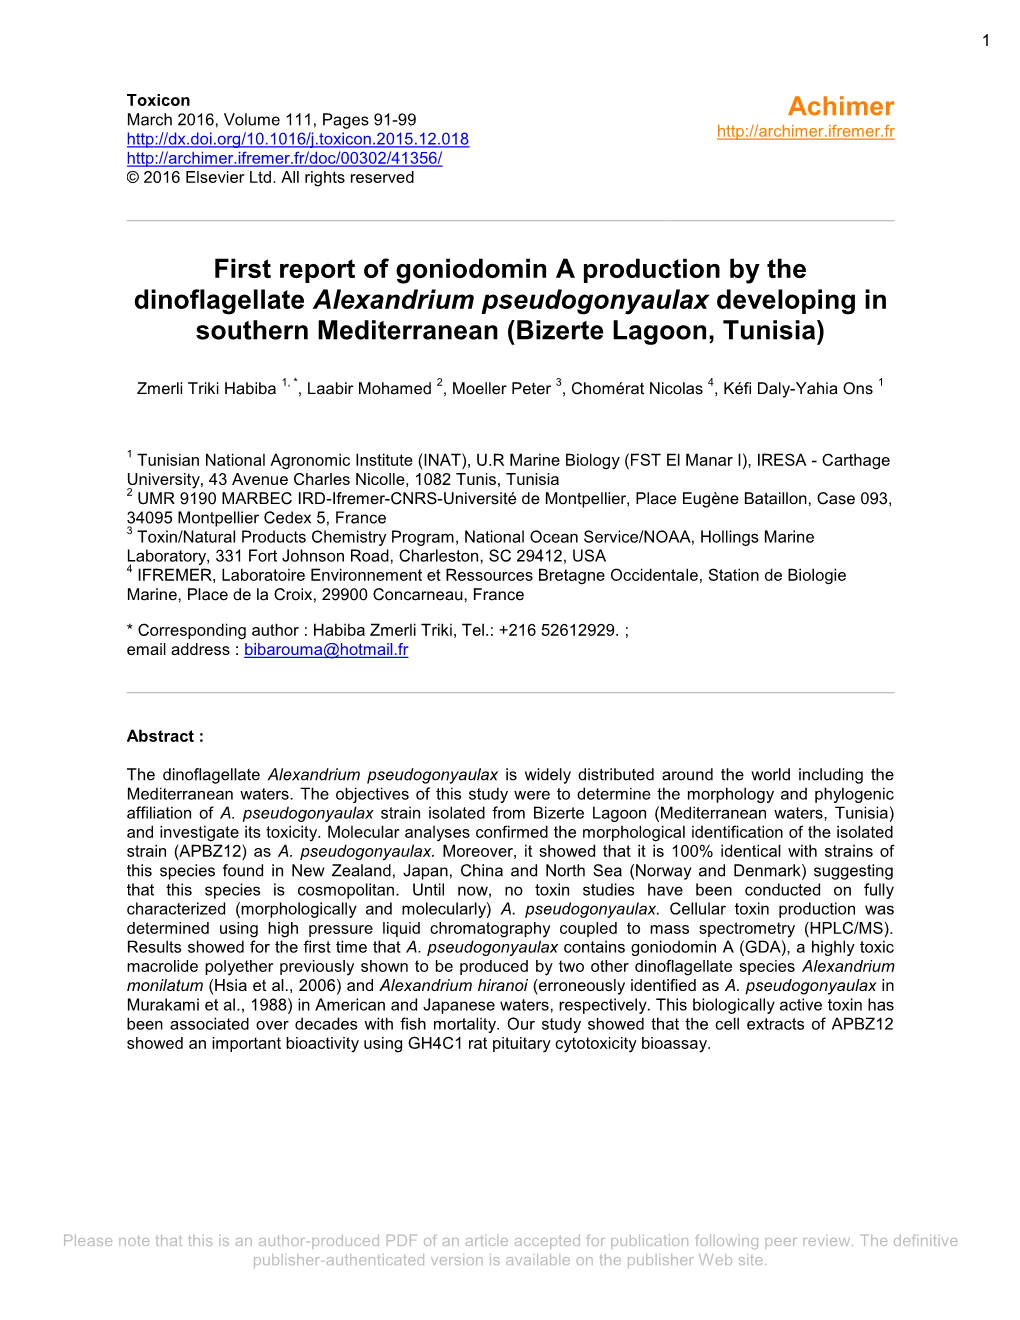 First Report of Goniodomin a Production by the Dinoflagellate Alexandrium Pseudogonyaulax Developing in Southern Mediterranean (Bizerte Lagoon, Tunisia)